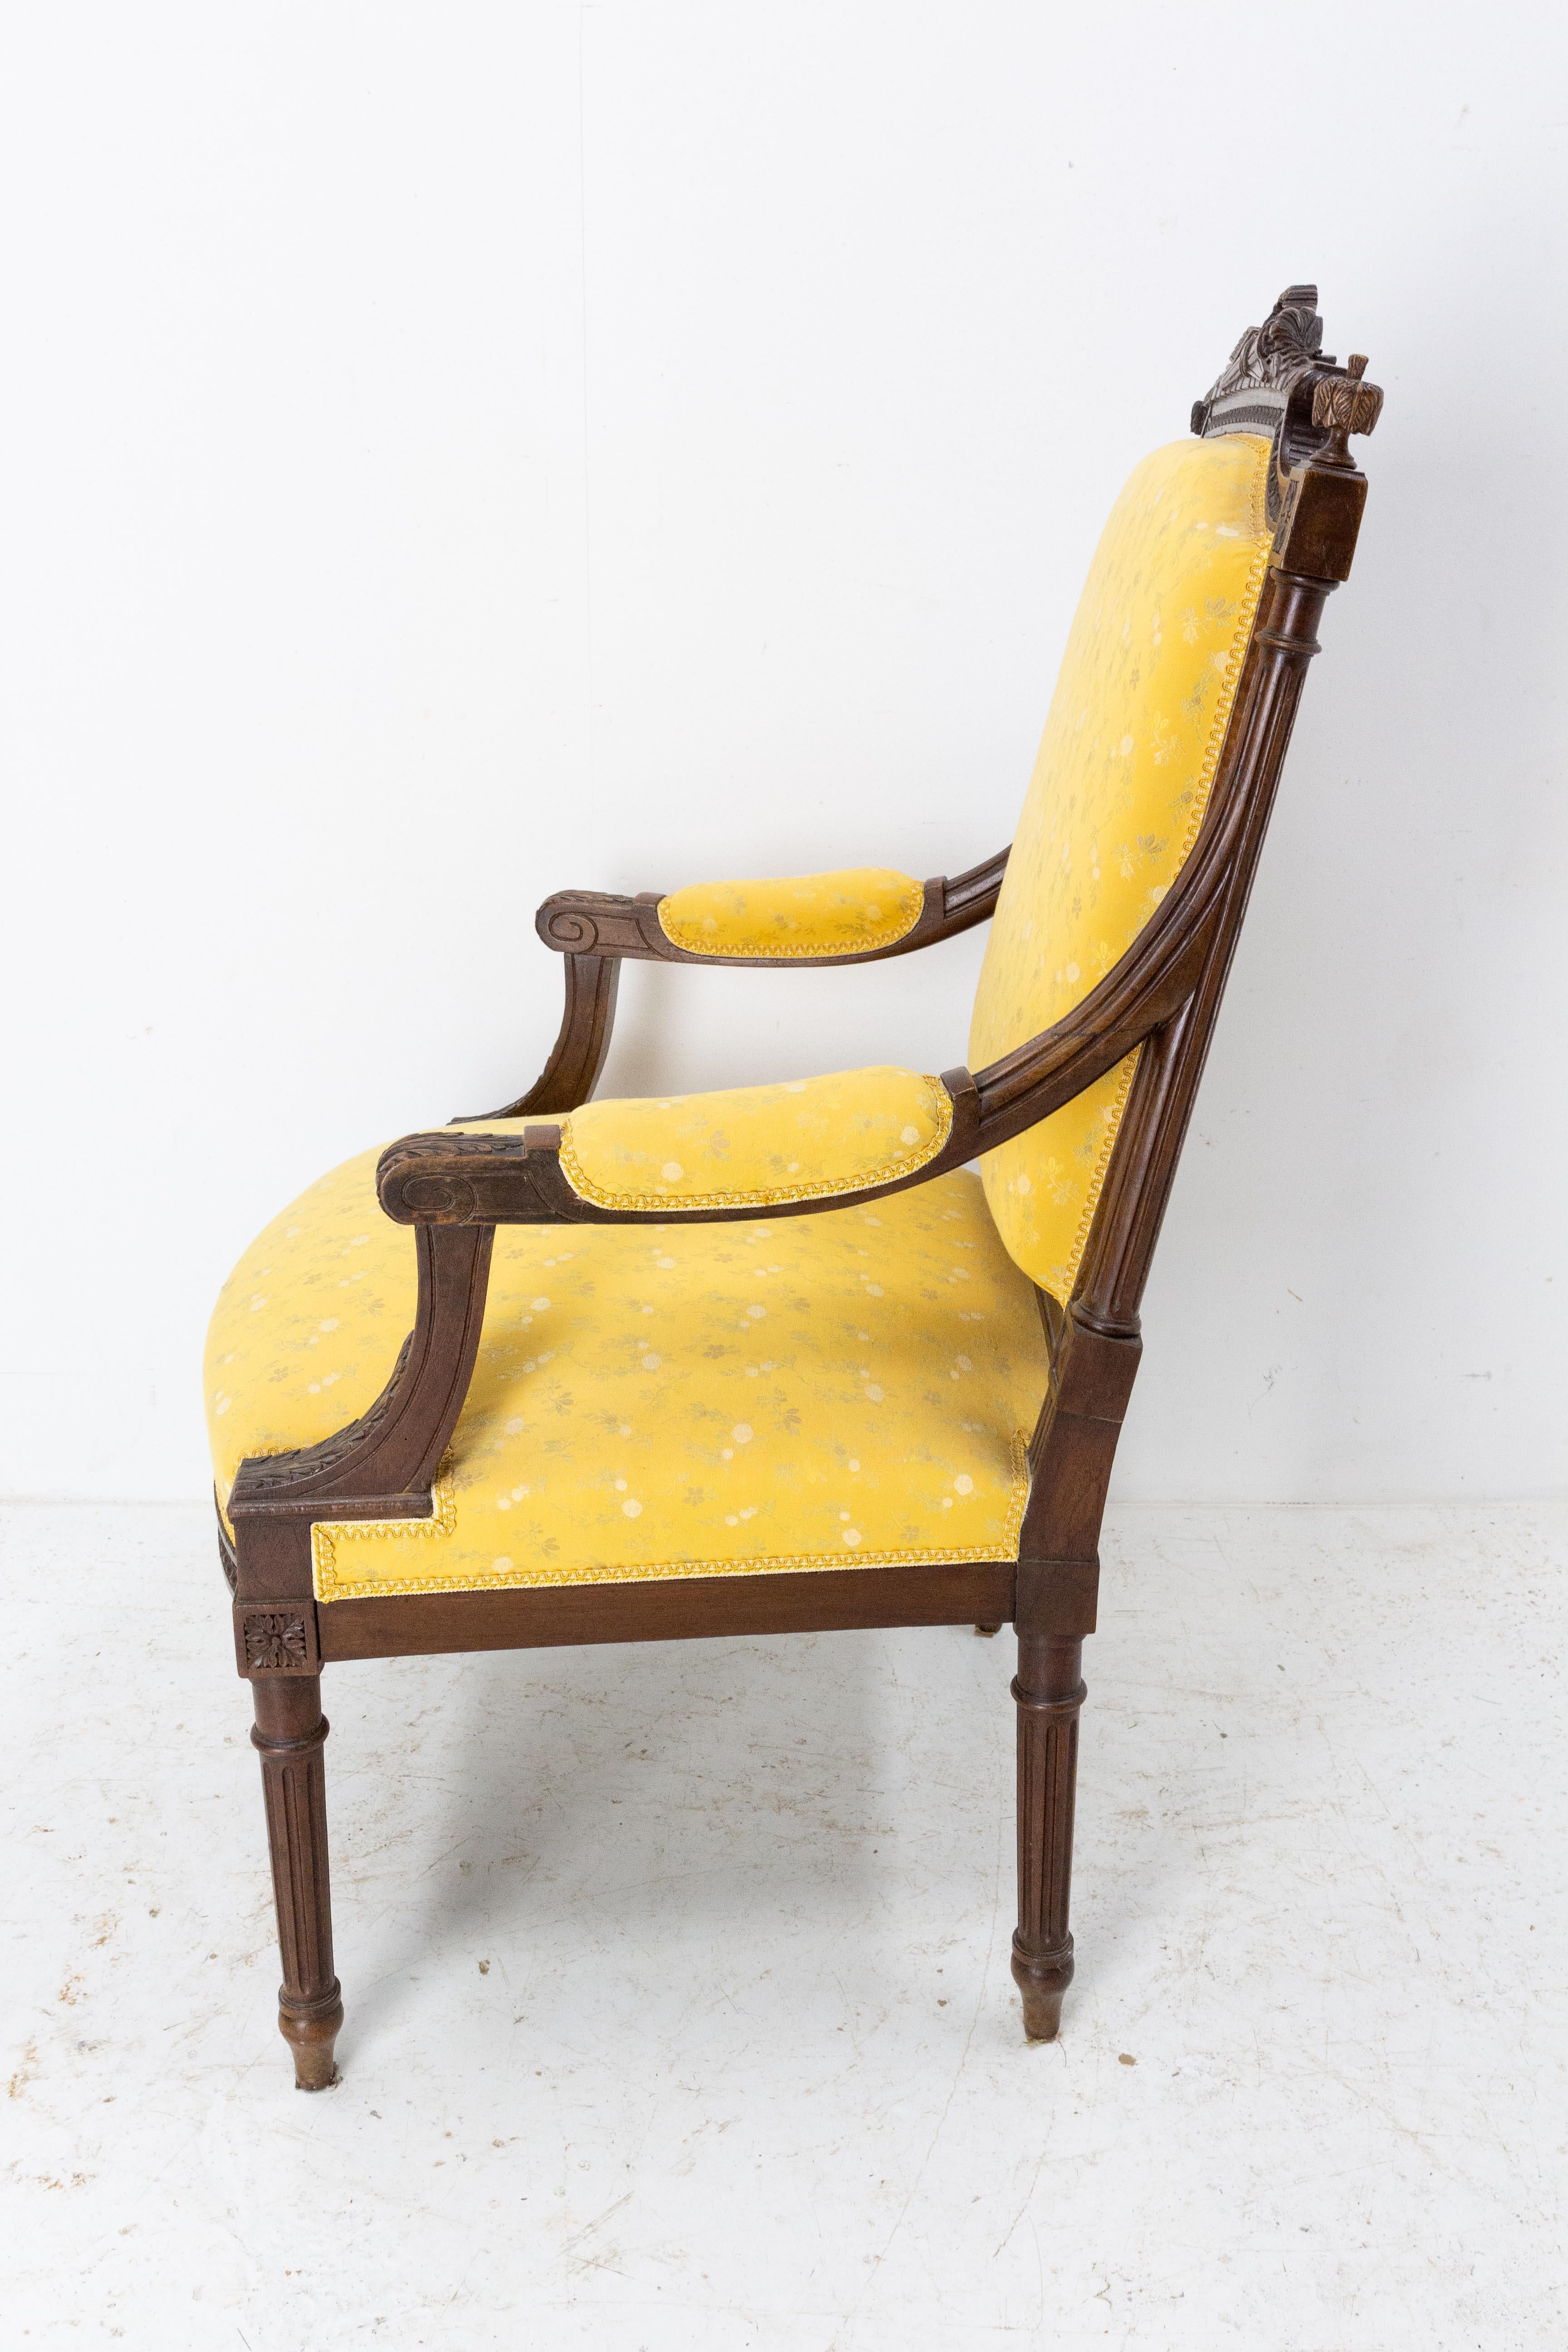 Walnut Fauteuil Louis XVI Revival Armchair French, Late 19th Century to Recover For Sale 1